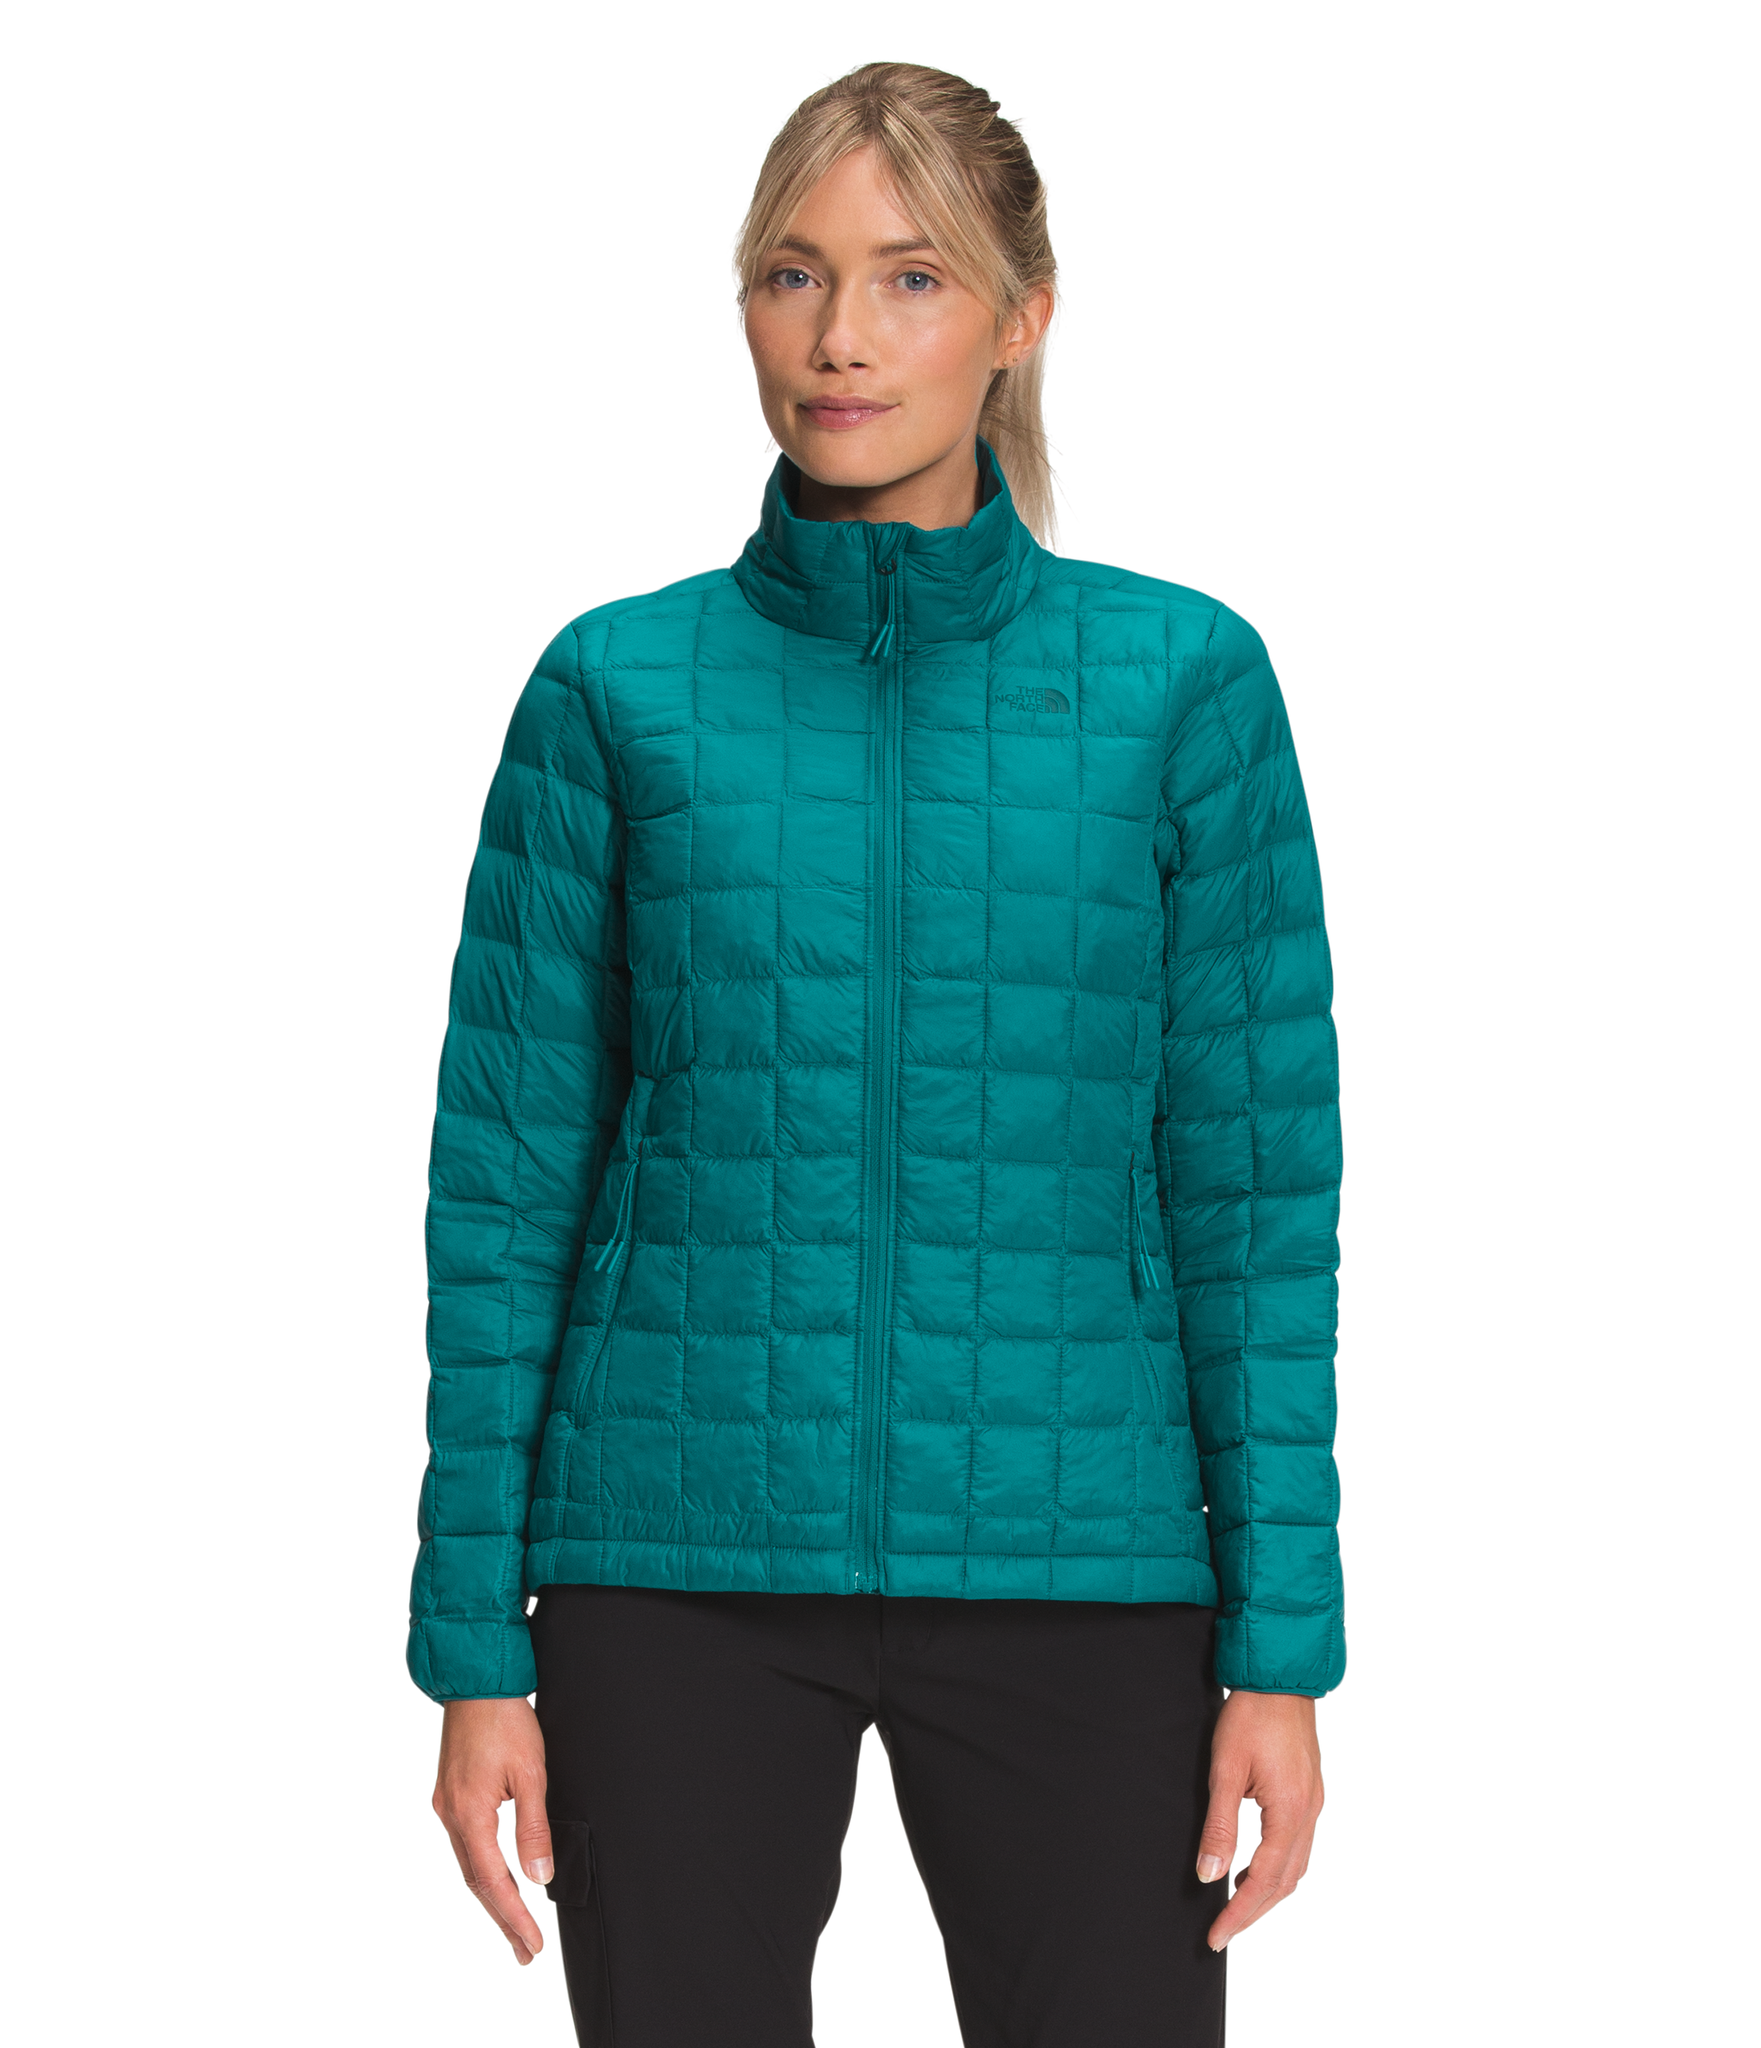 W ThermoBall ECO Jacket